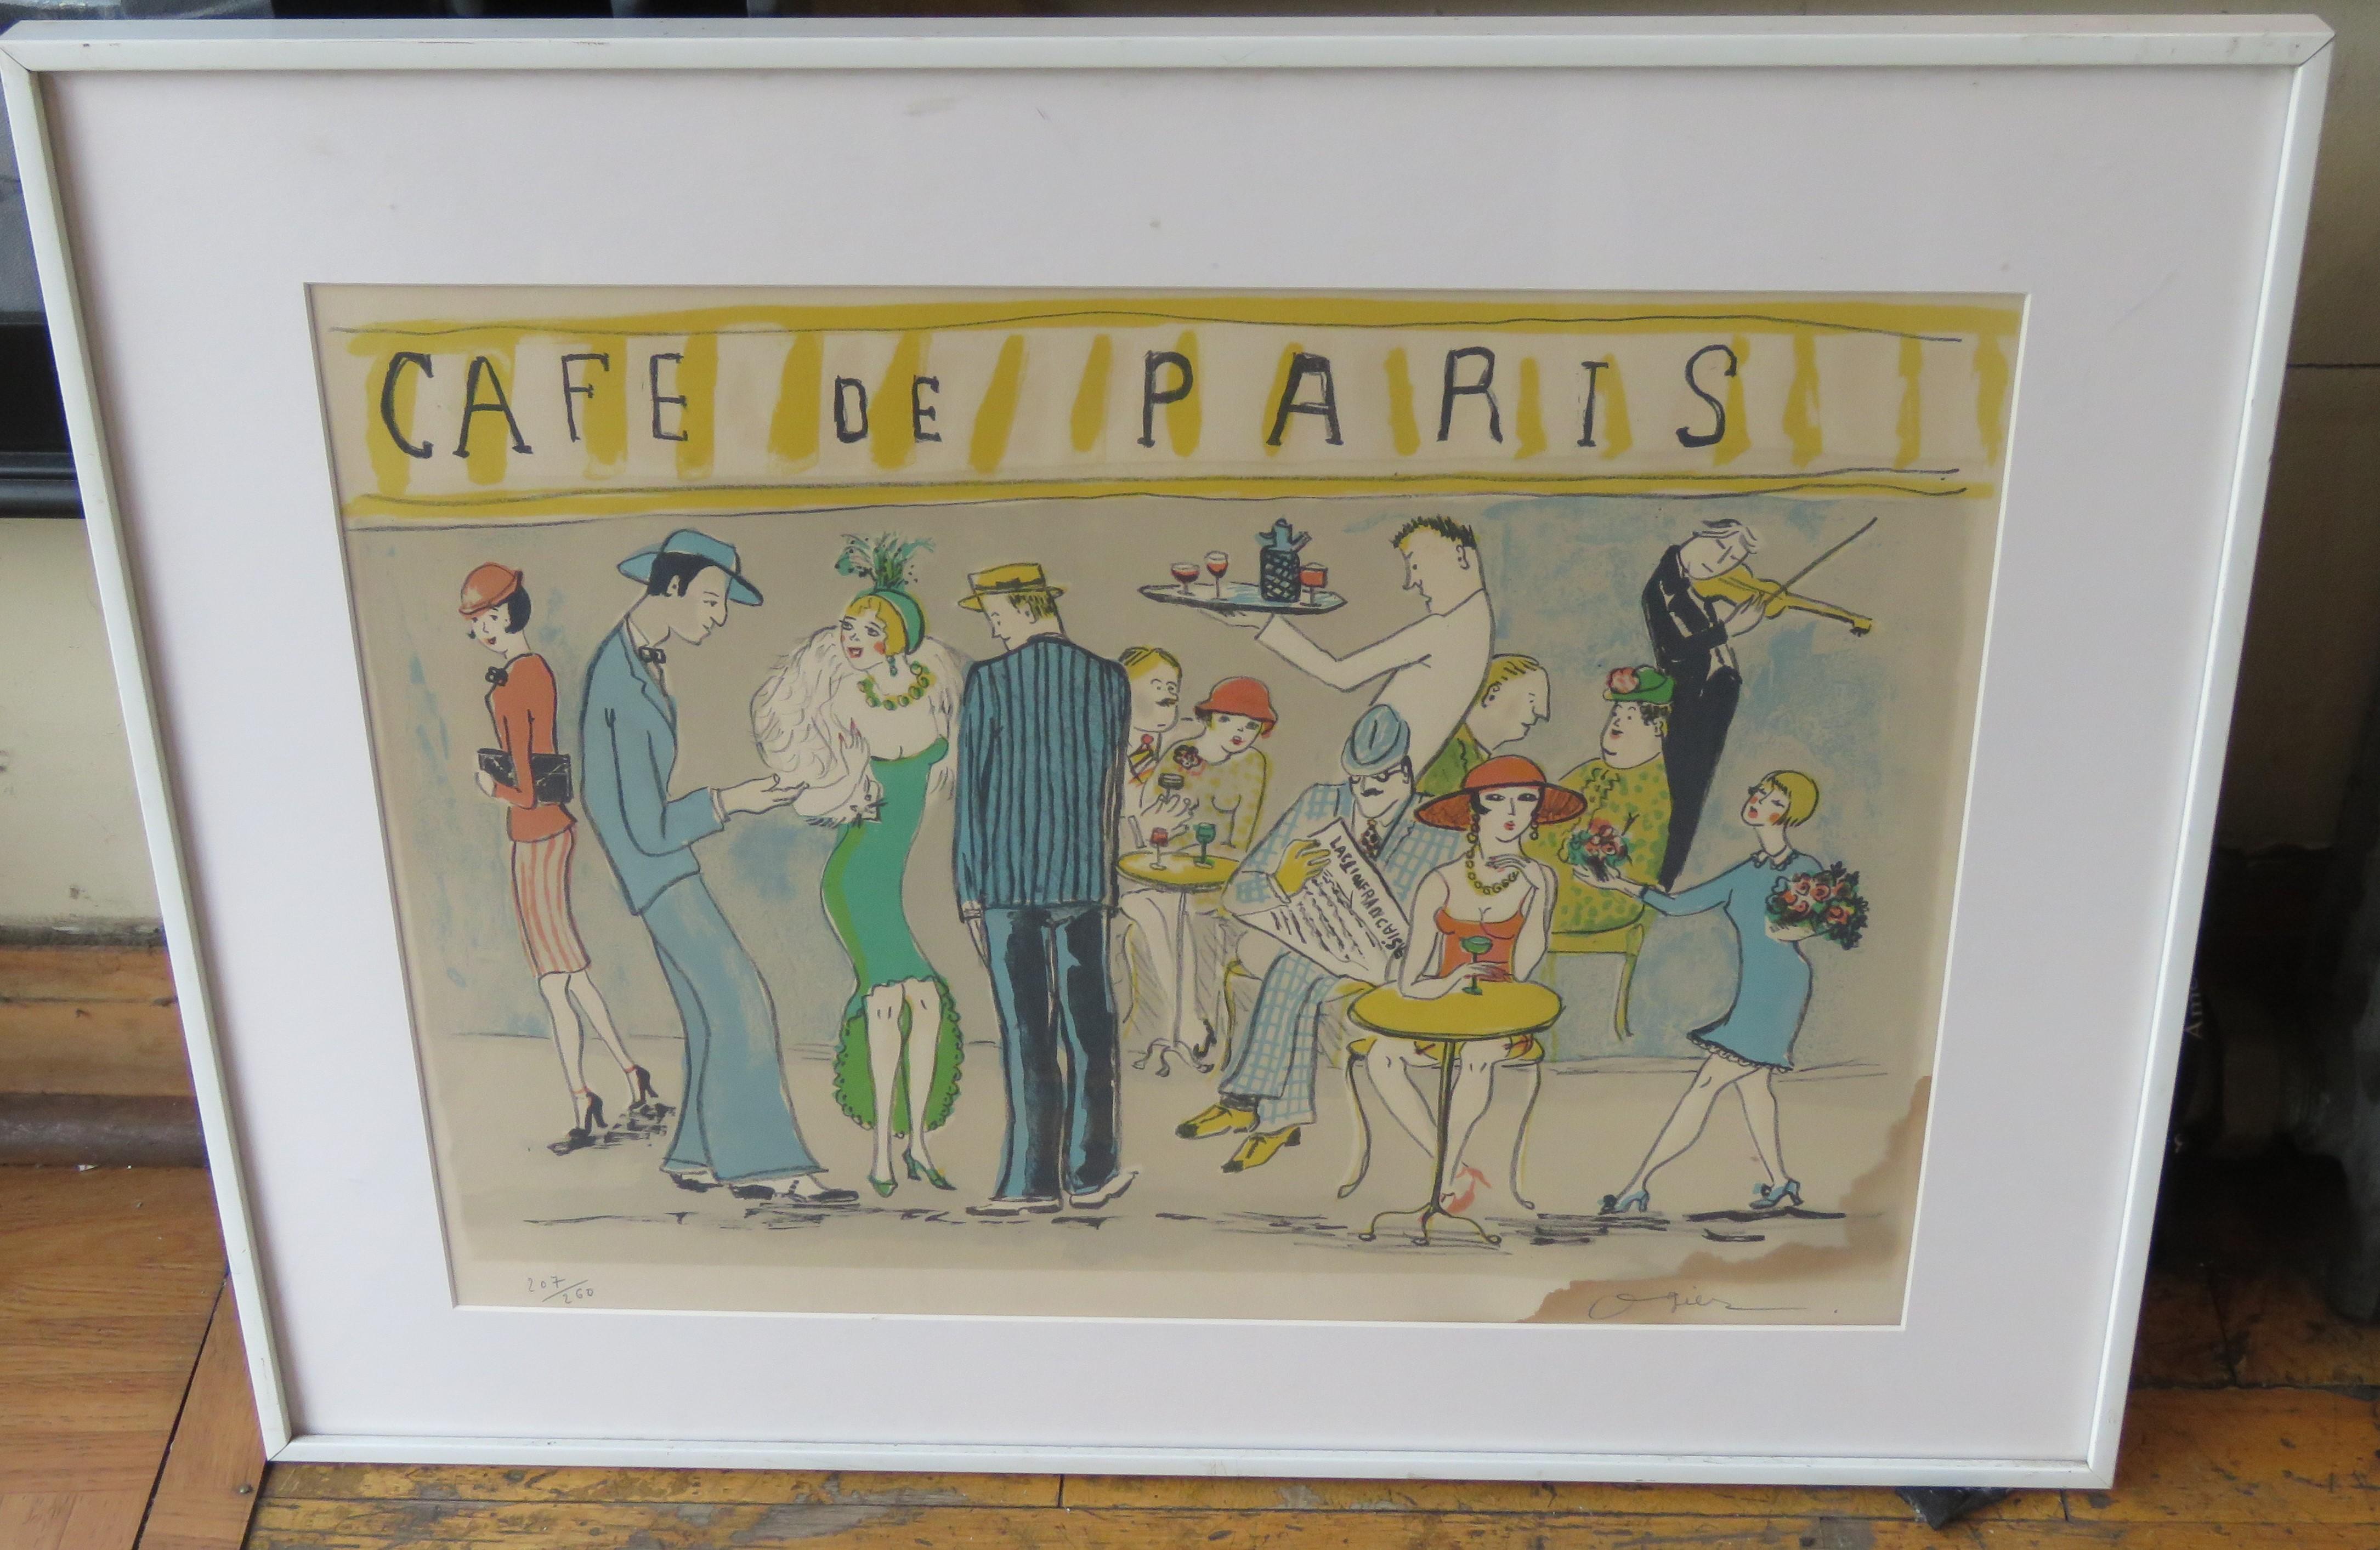 The Following Item we are Offering is A Very Beautiful and Very RARE Original Framed etching and Colorful Lithograph showcasing Beautifully Dressed People in a Cafe in Paris. Circa 1930s - 1940s. A Rare Masterpiece!!!  

Framed Measurements 24 1/2